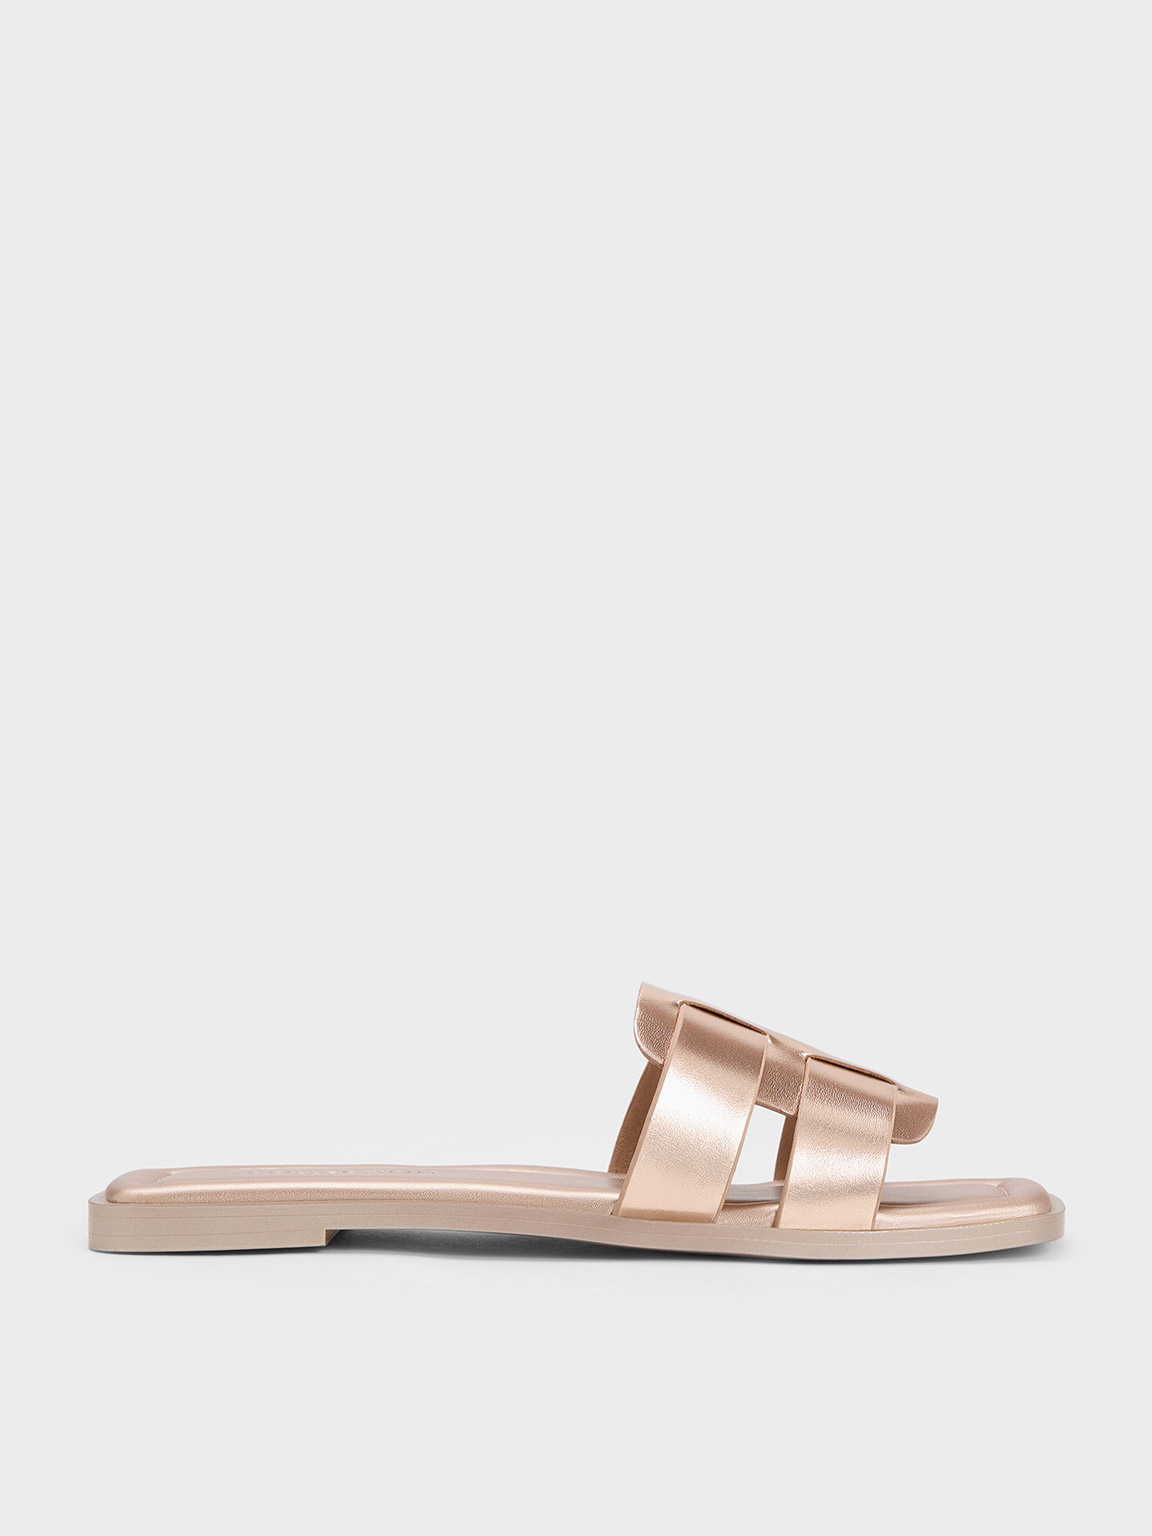 Charles & Keith Interwoven Metallic Leather Slide Sandals In Rose Gold